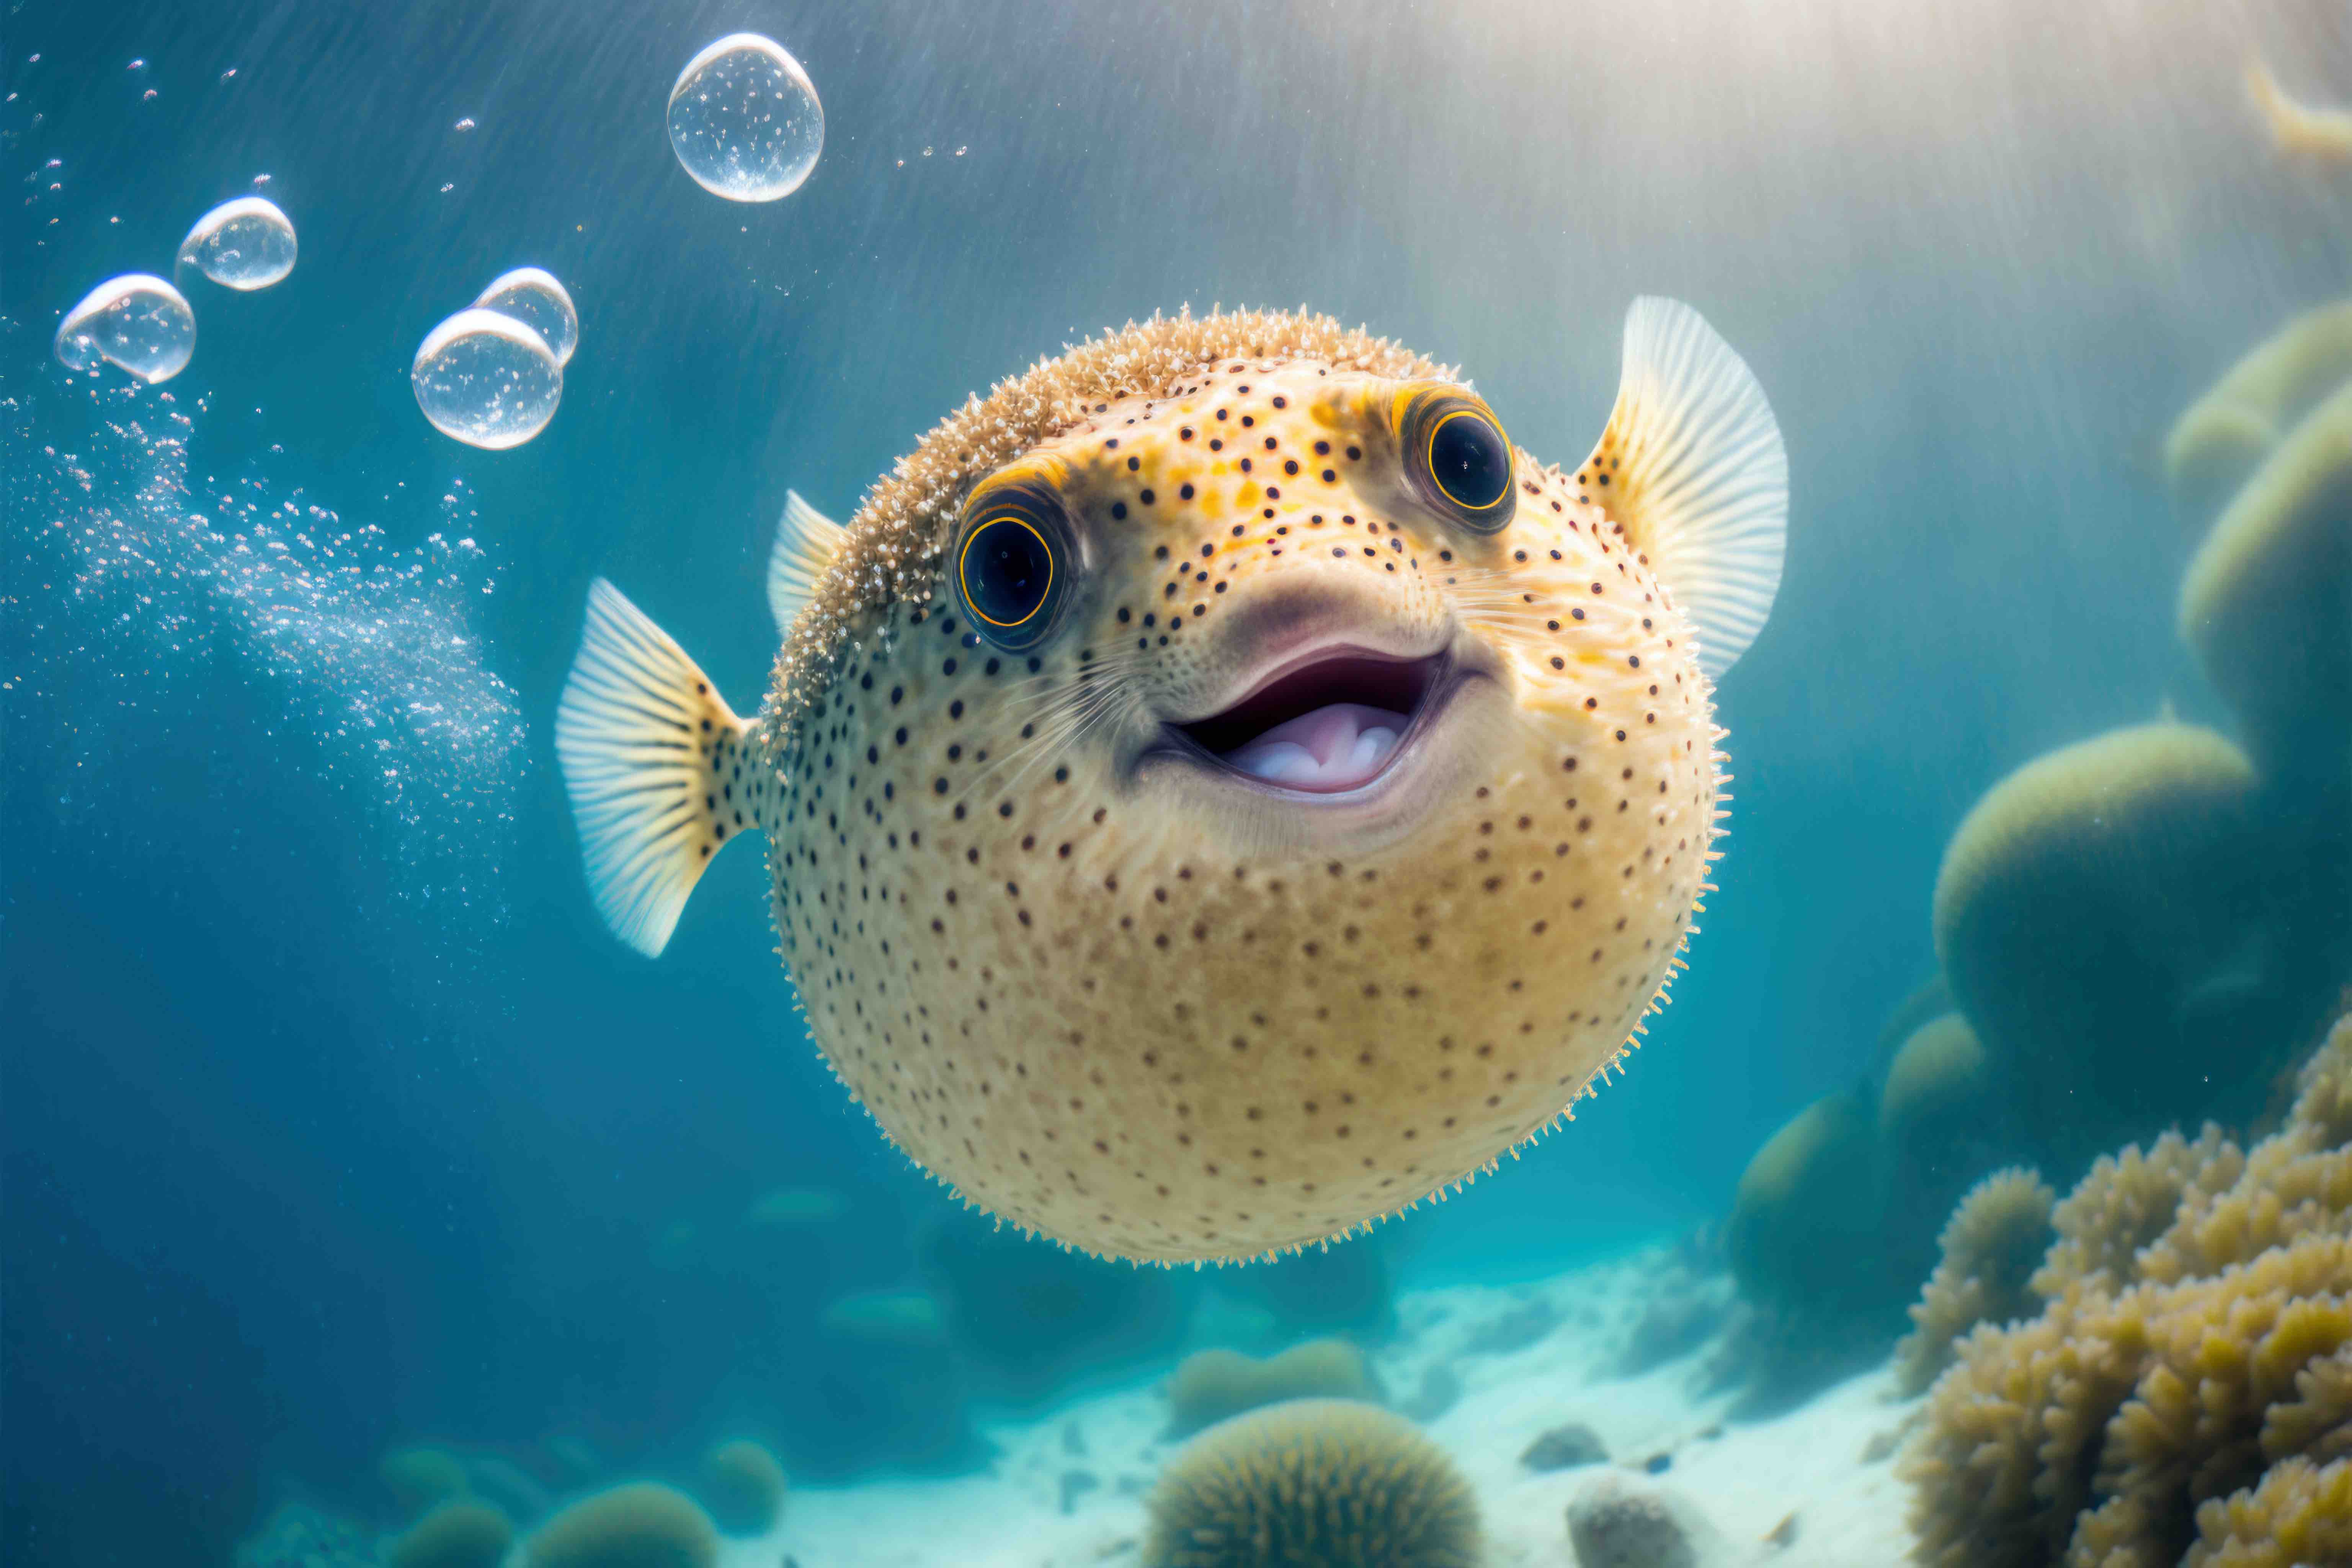 18 Fun Facts About Pufferfish The Puffiest Fish Of The Sea - Facts.net